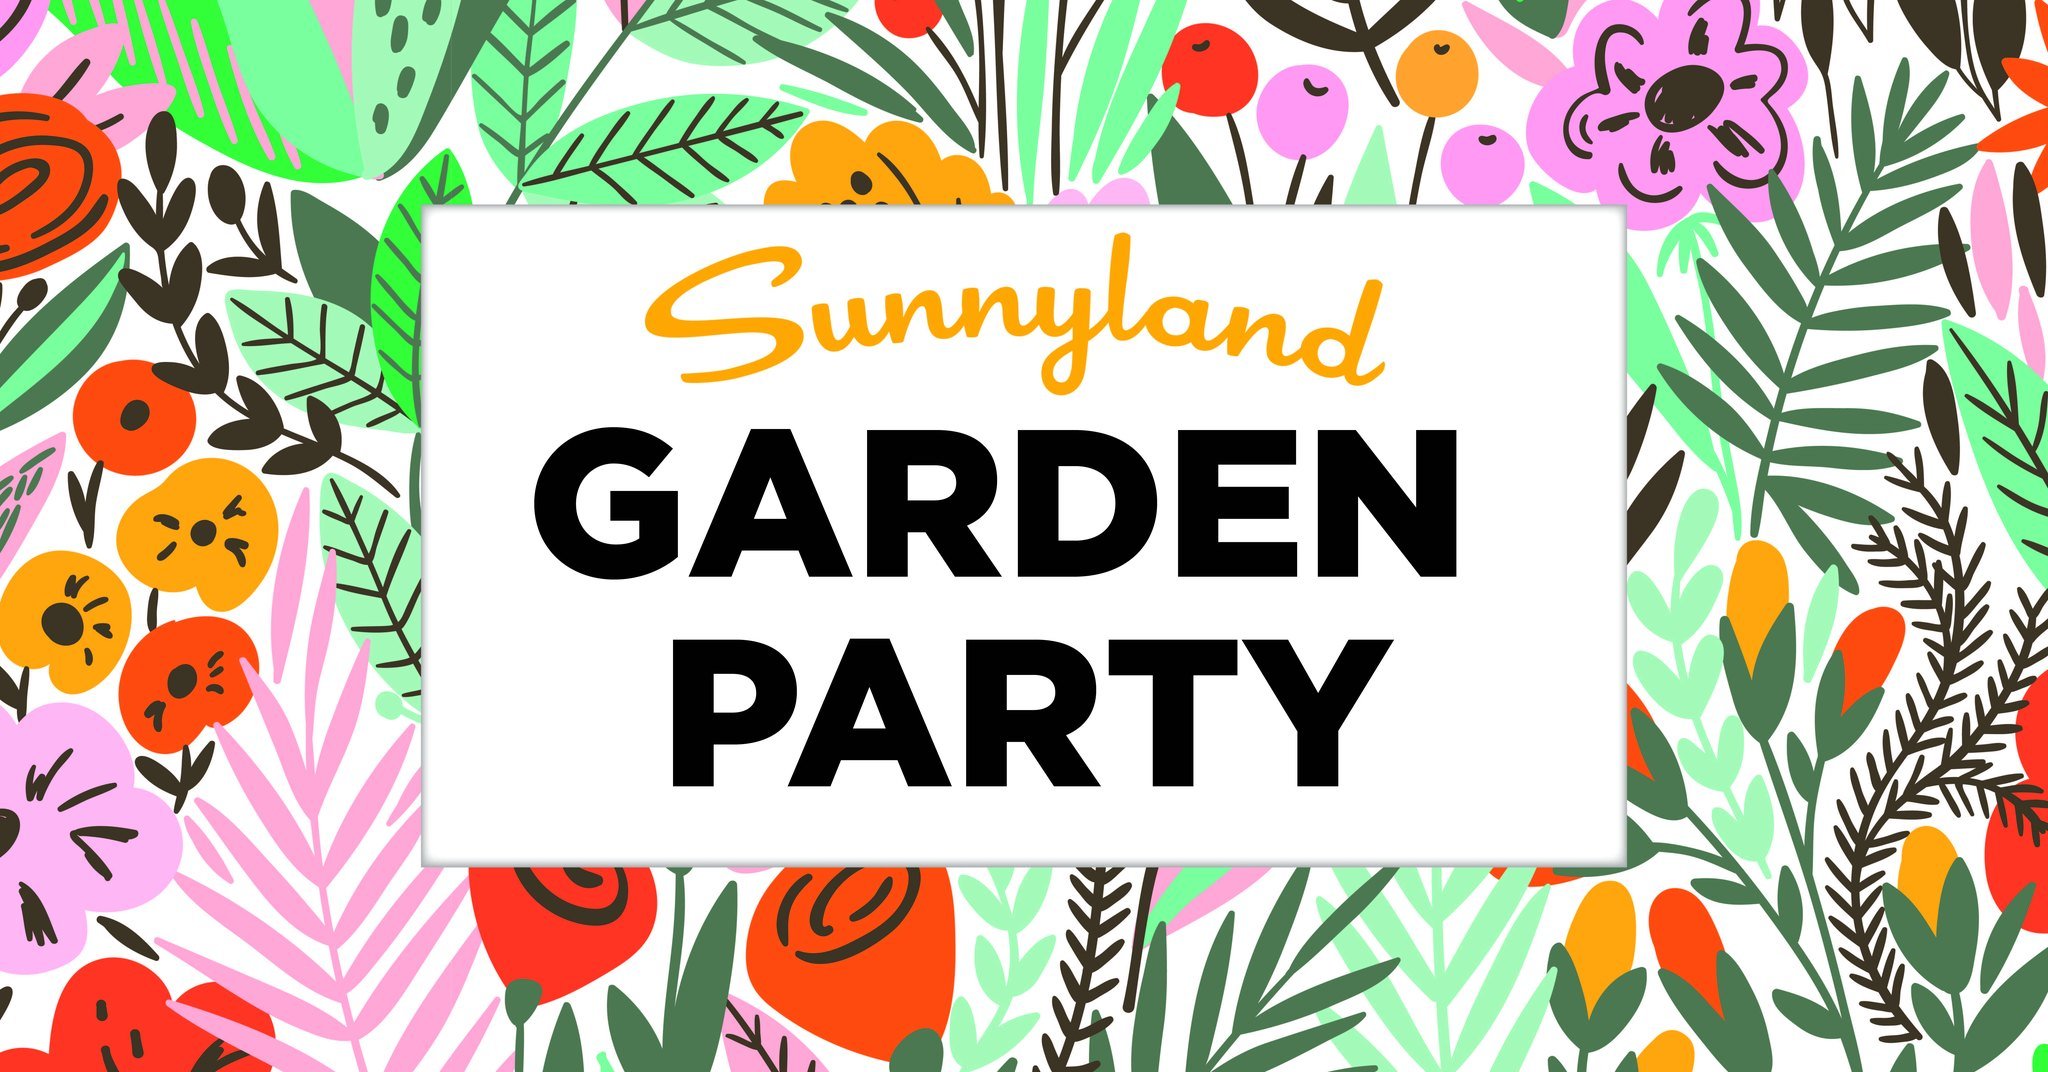 It's that time of year again! The Sunnyland Garden Party is officially set to kick off next Thursday, May 9th through Sunday, May 12th! 🍺🥳🌷

Celebrate Springtime with 7 Sunnyland neighborhood breweries- @kulshanbrewery (both locations), @otherland